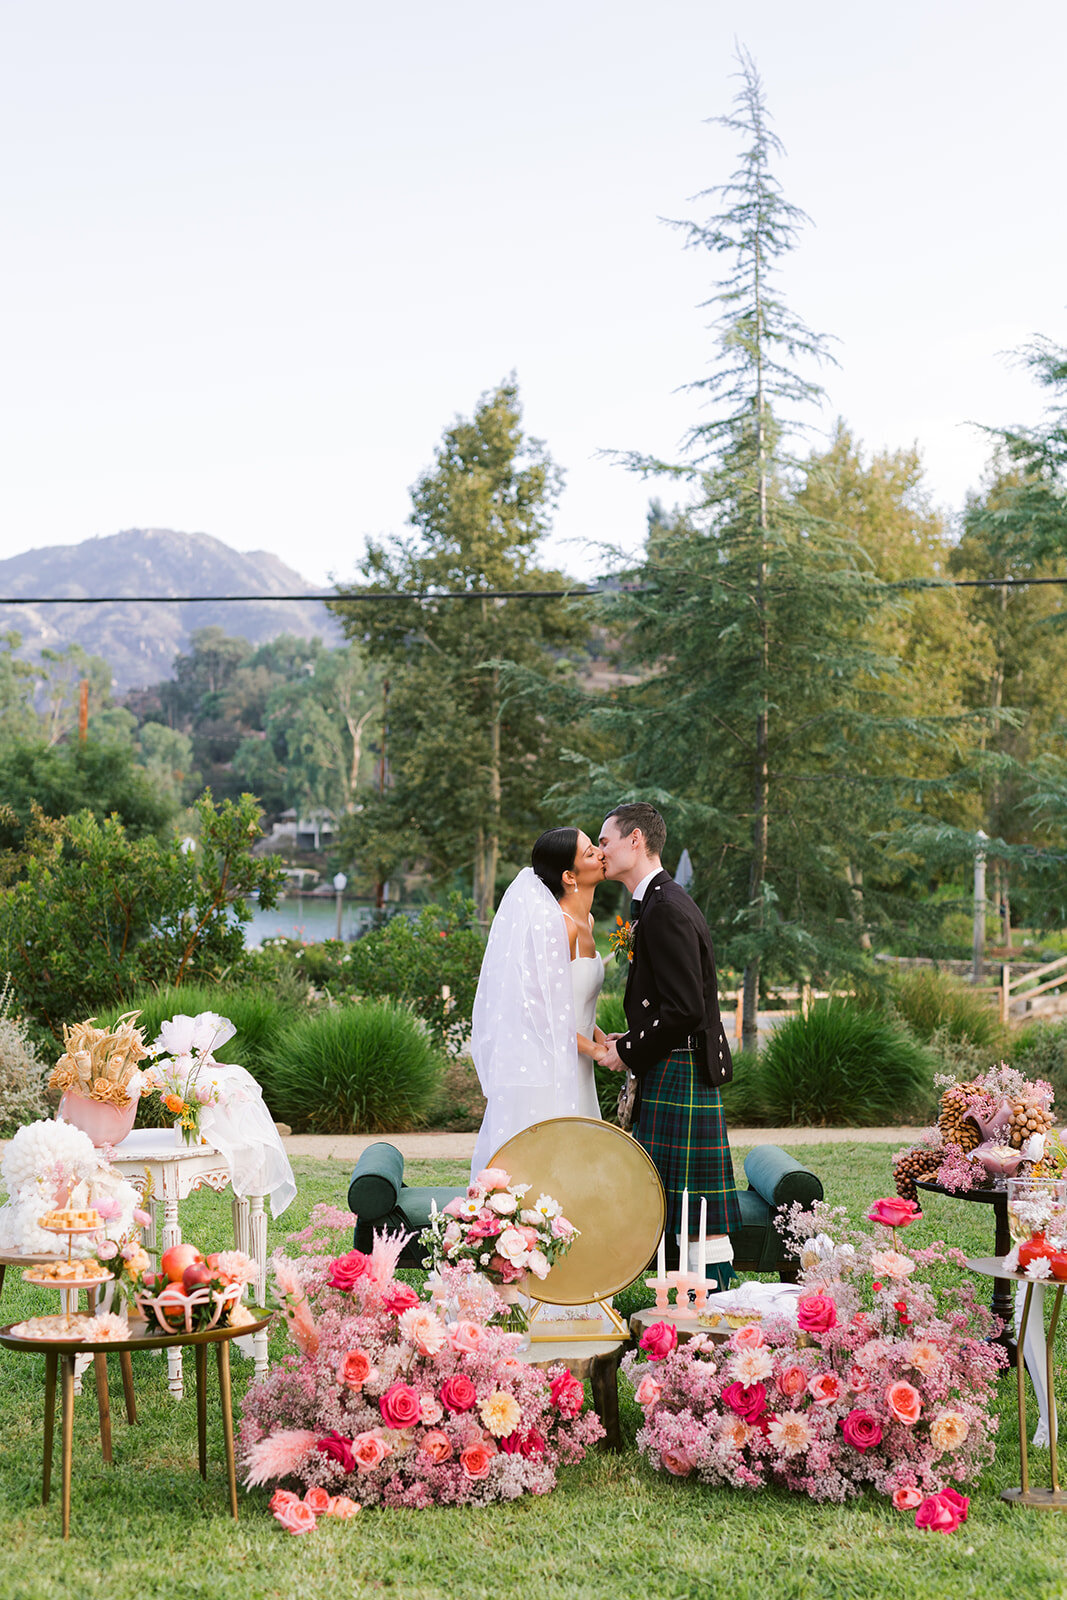 Angelica Marie Photography_Natalie Pirzad and Gordon Stewart Wedding_September 2022_The Lodge at Malibou Lake Wedding_Malibu Wedding Photographer_1252